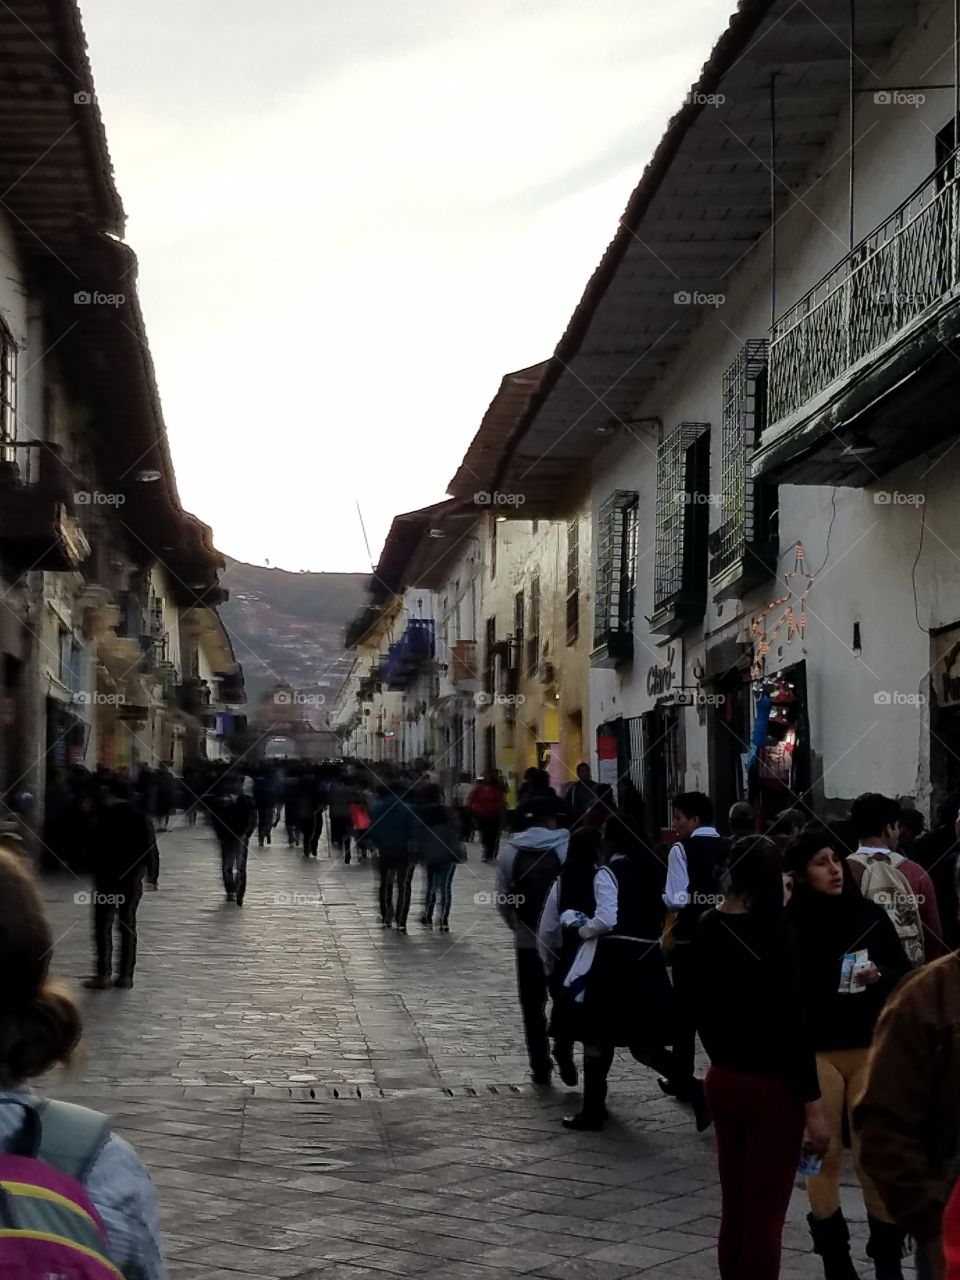 Wandering through the streets of Cusco